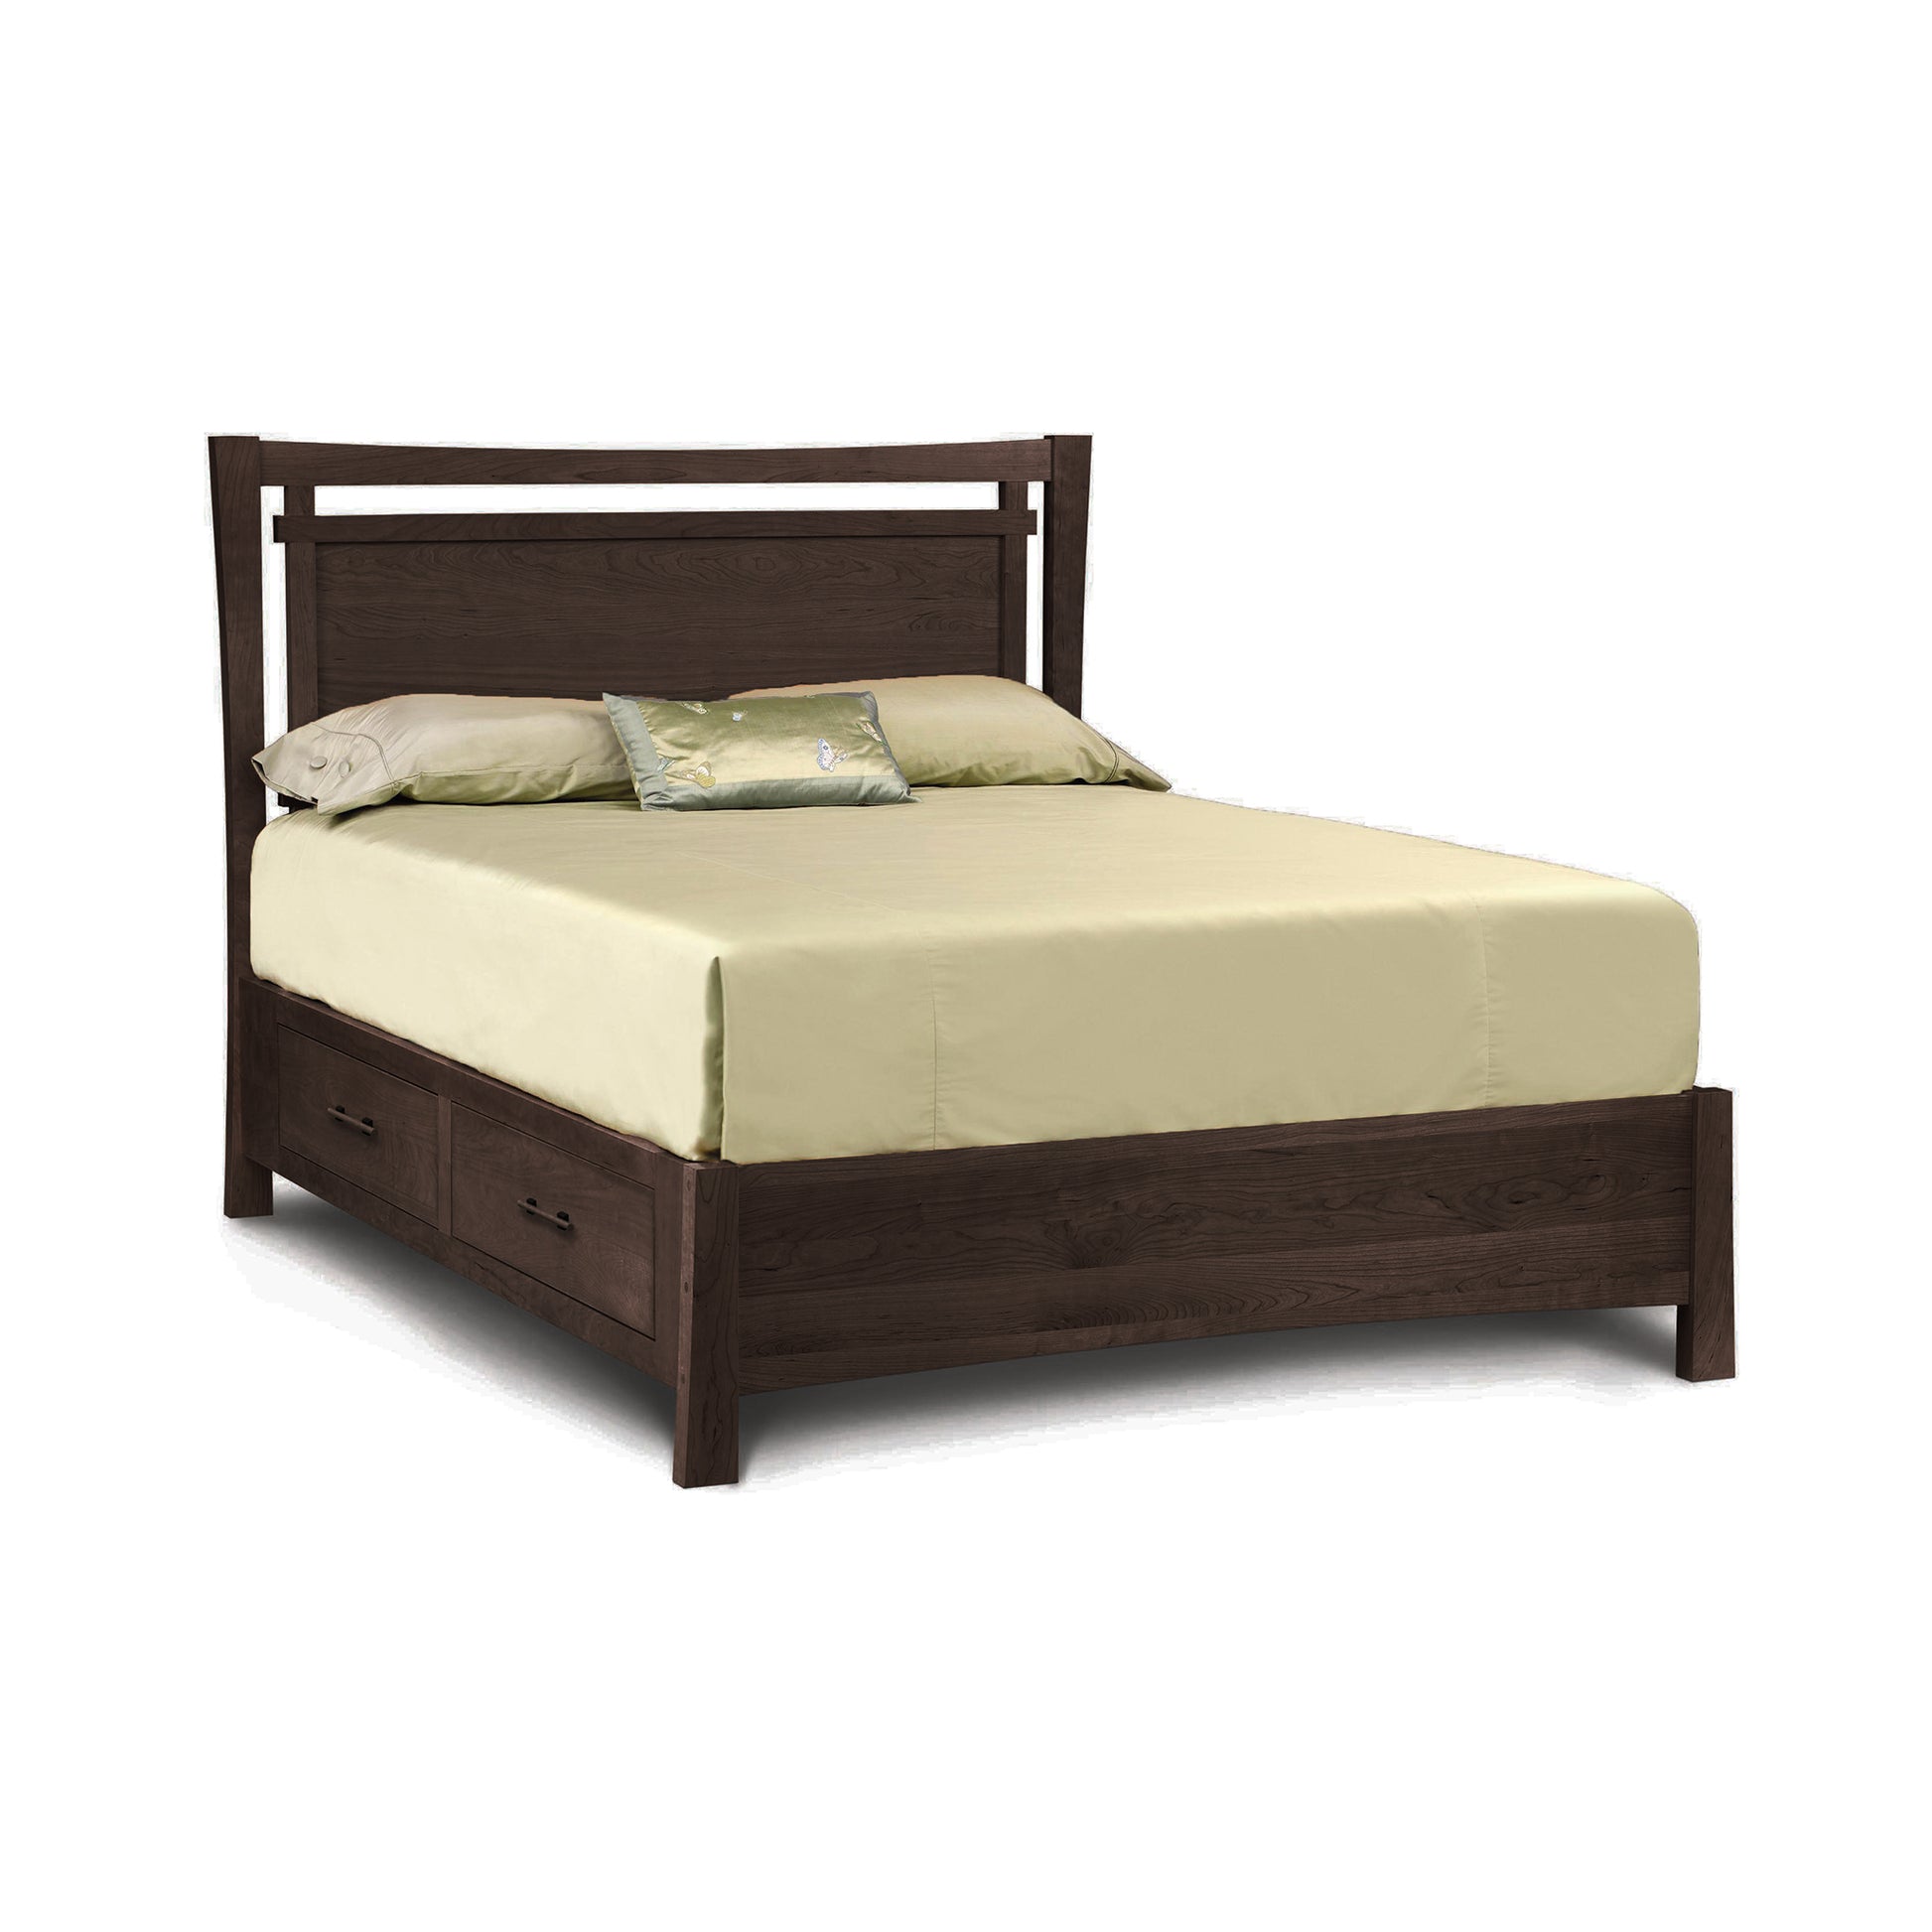 The Copeland Furniture Monterey Storage Bed is a stylish and functional piece of furniture that features a beautiful wooden headboard and footboard. Made from high-quality cherry wood, this bed offers both aesthetic appeal and durability.